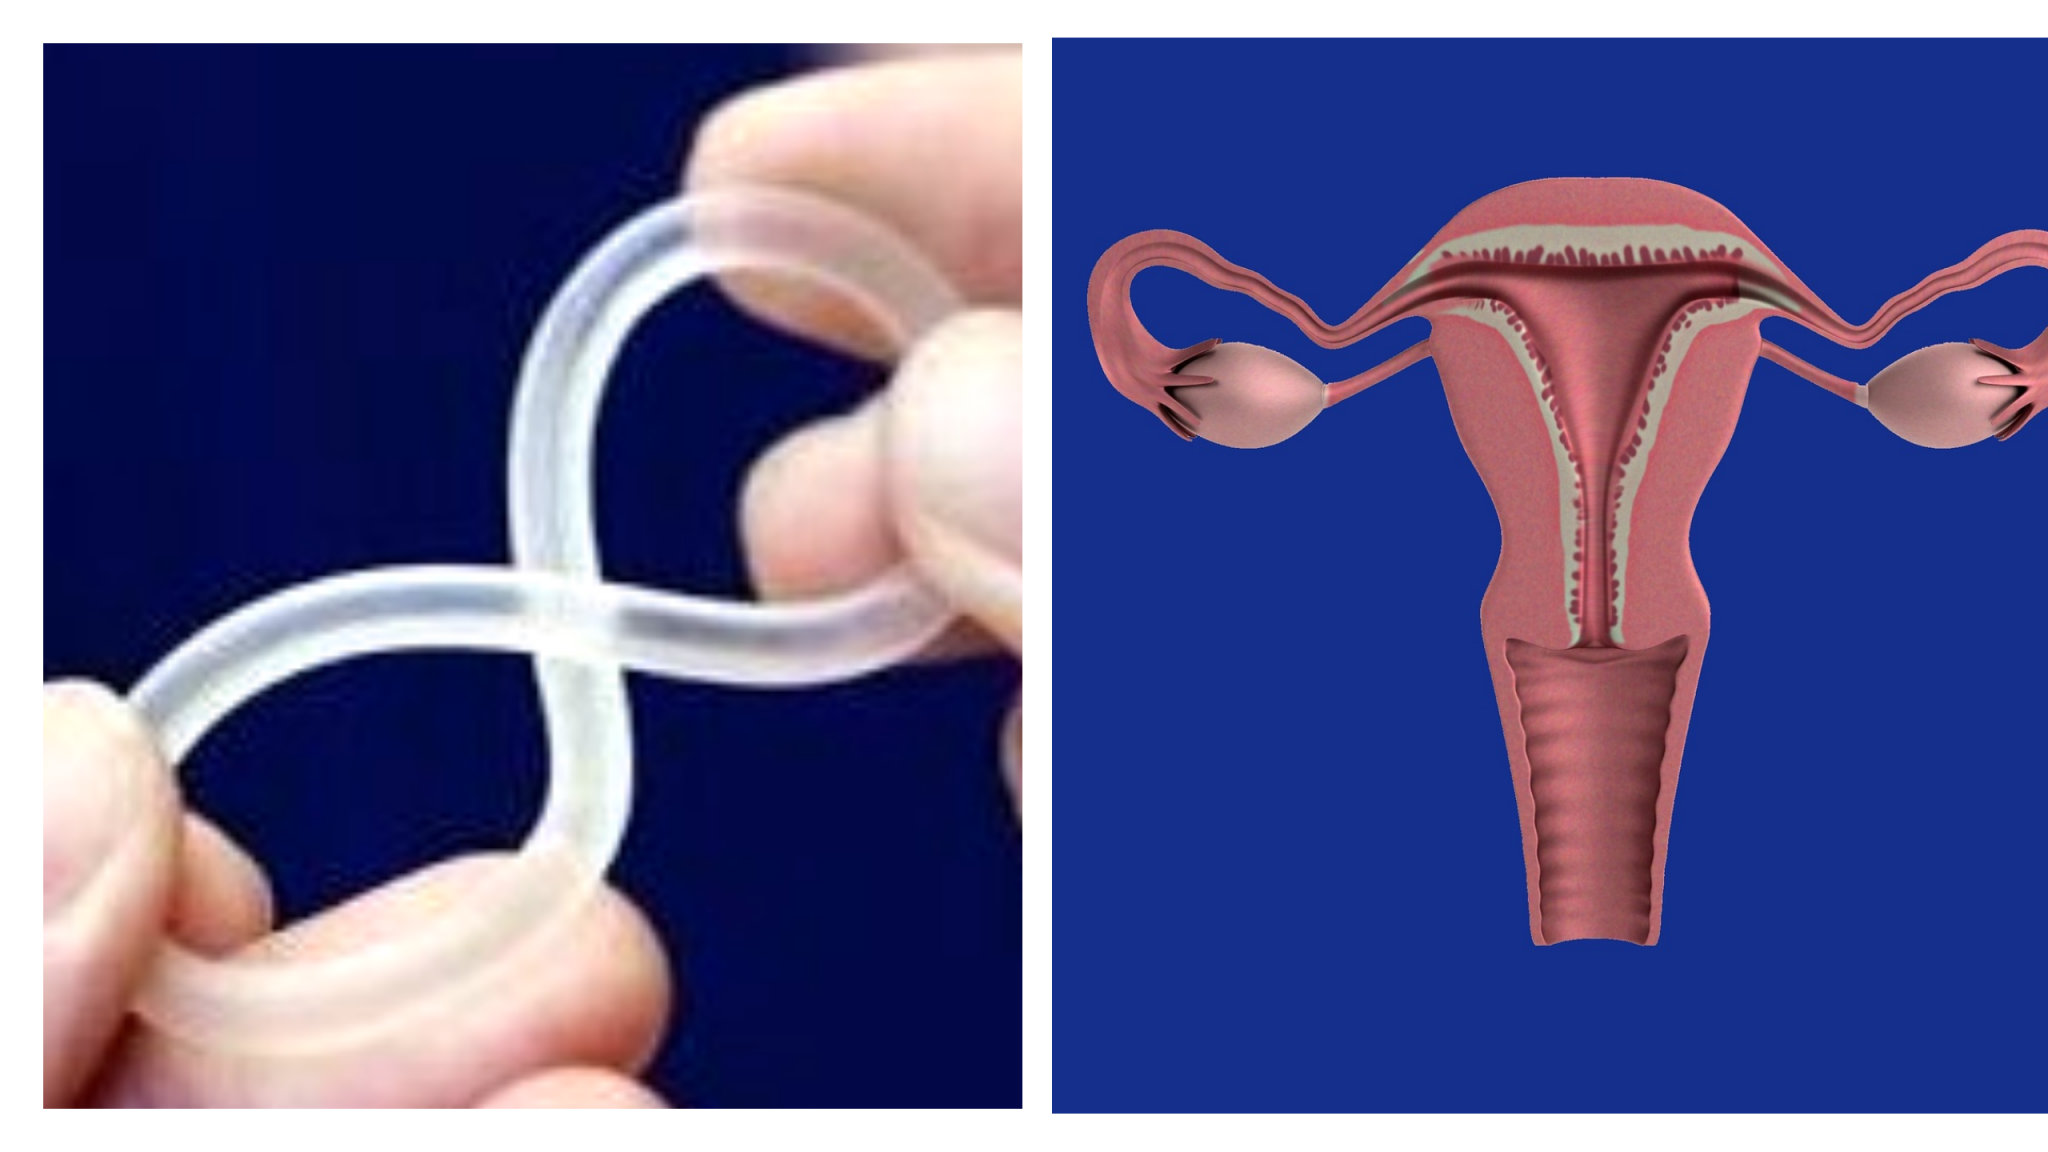 Fda Approves A New Viginal Ring Contraceptive Annovera That Can Be Used For A Year Drugsbank